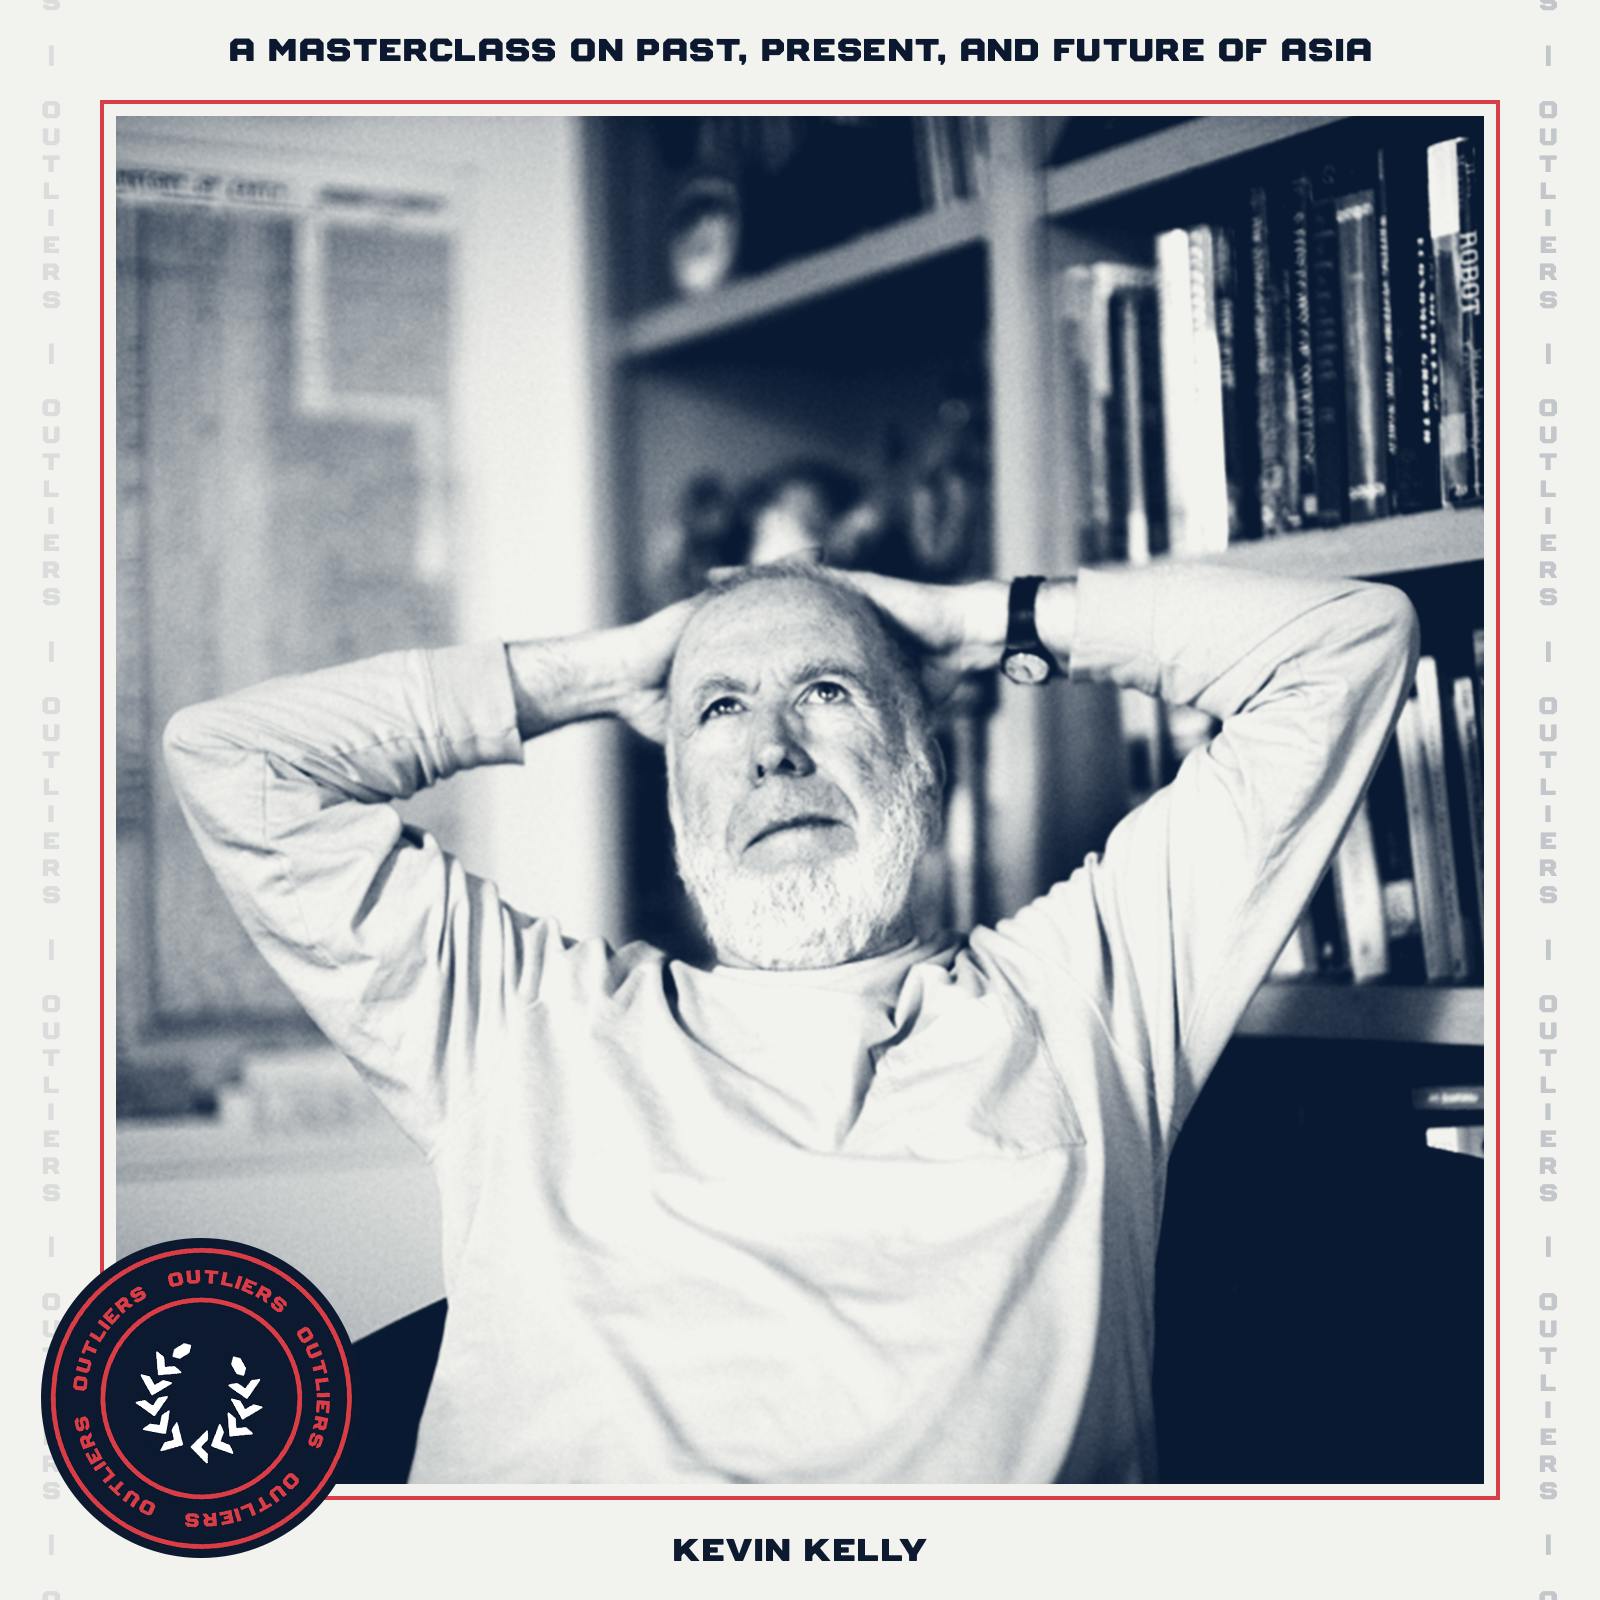 All-Time Top 10 Guests – #10 Kevin Kelly (Vanishing Asia: A Masterclass on the Past, Present, and Future of Asia) Image